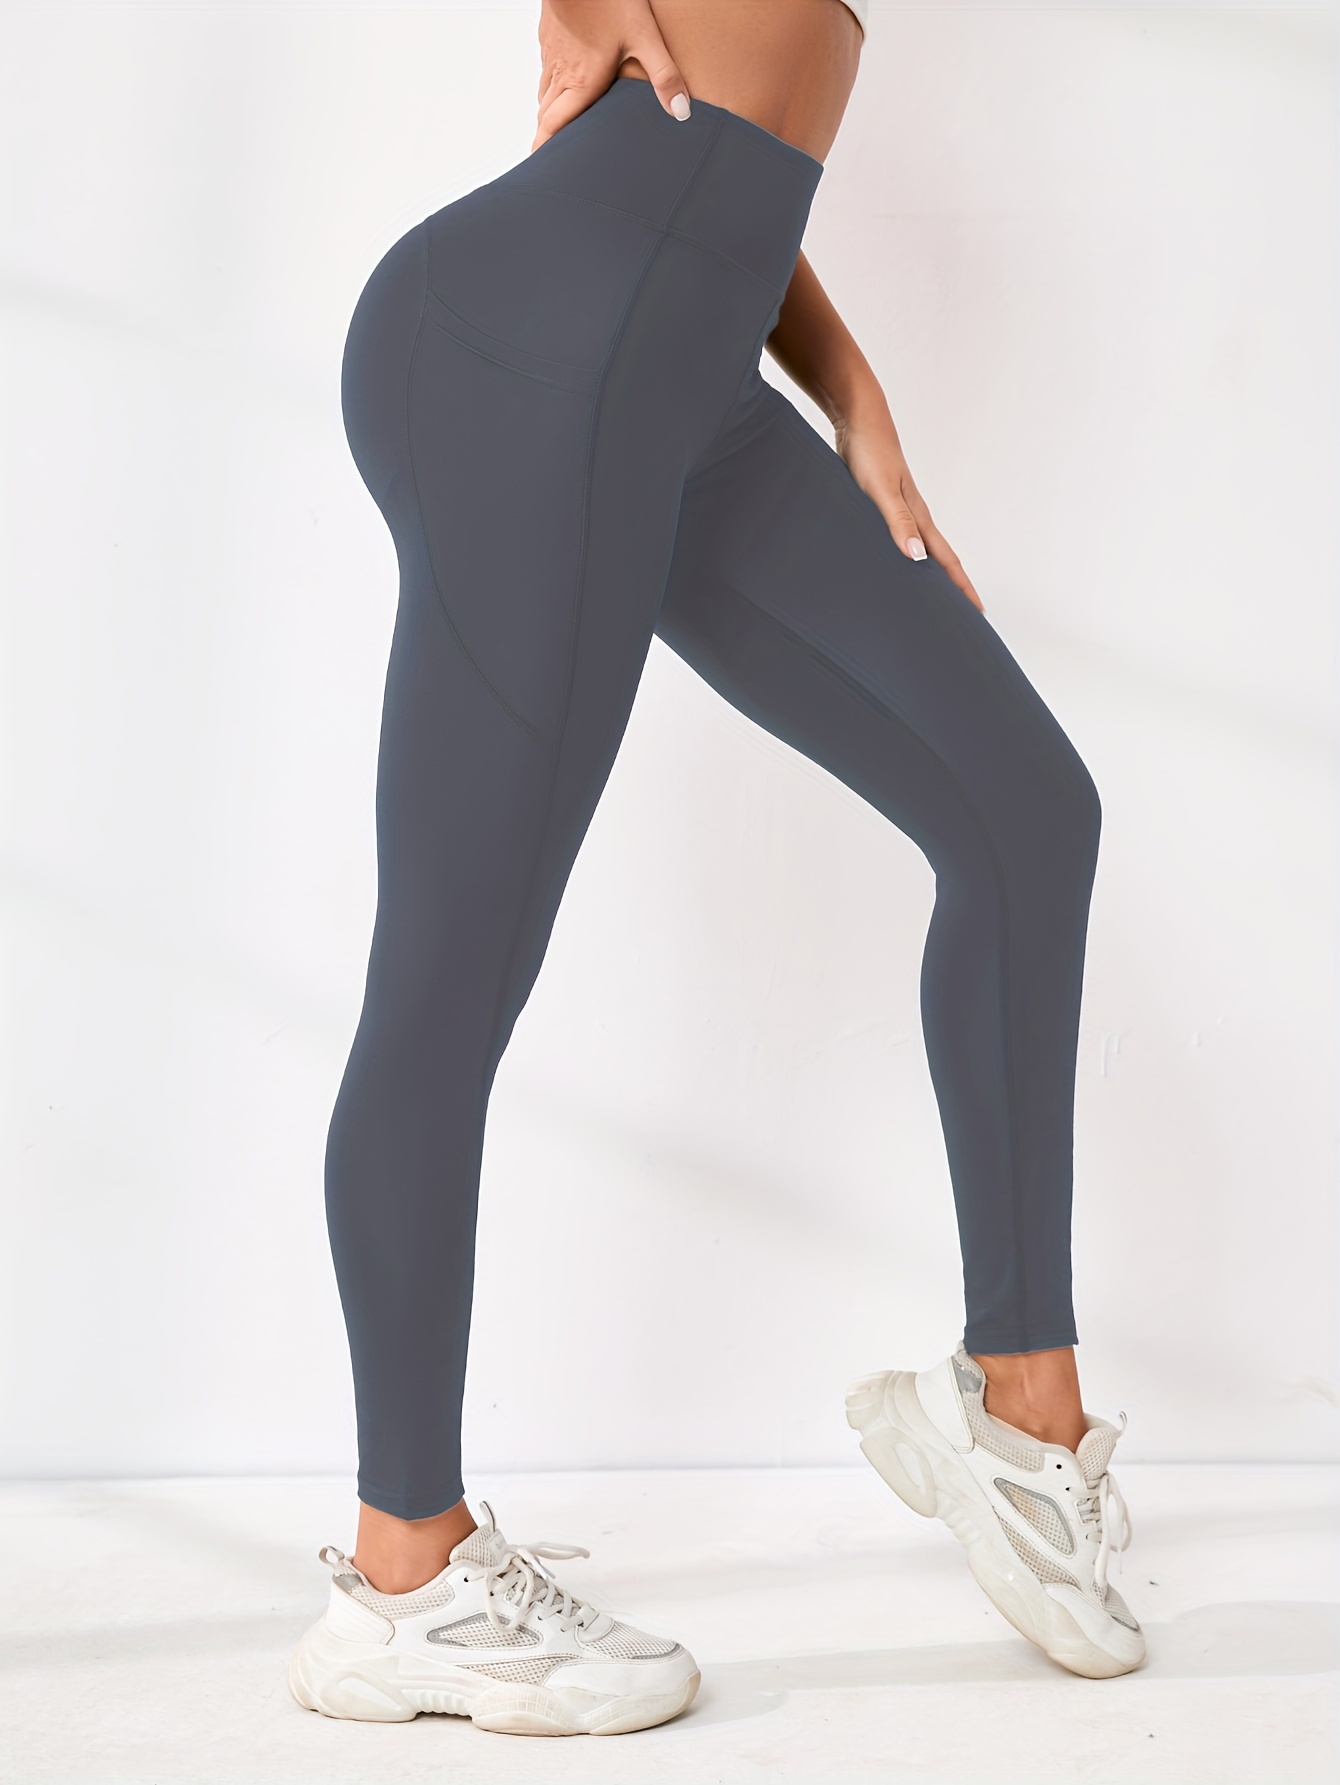 Running Women'S High Elastic Seamless Sports Leggings With Pockets